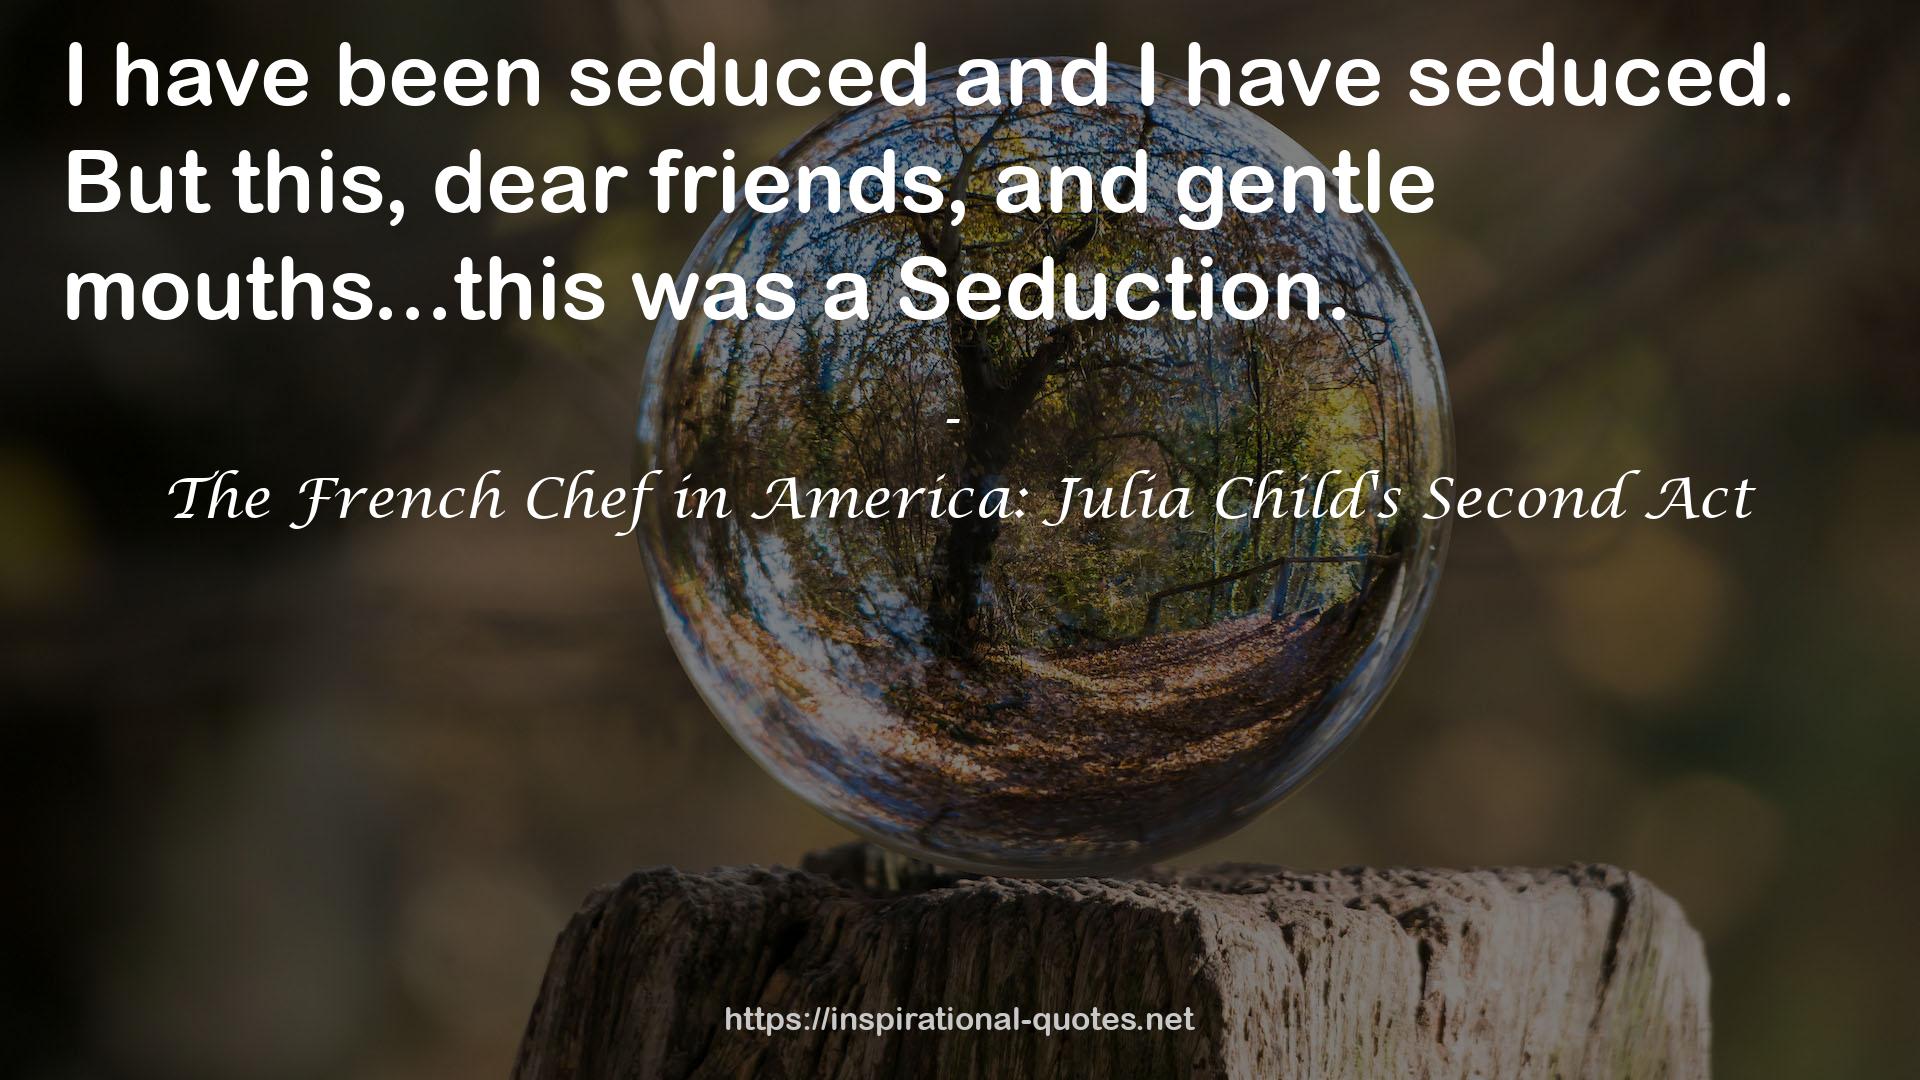 The French Chef in America: Julia Child's Second Act QUOTES